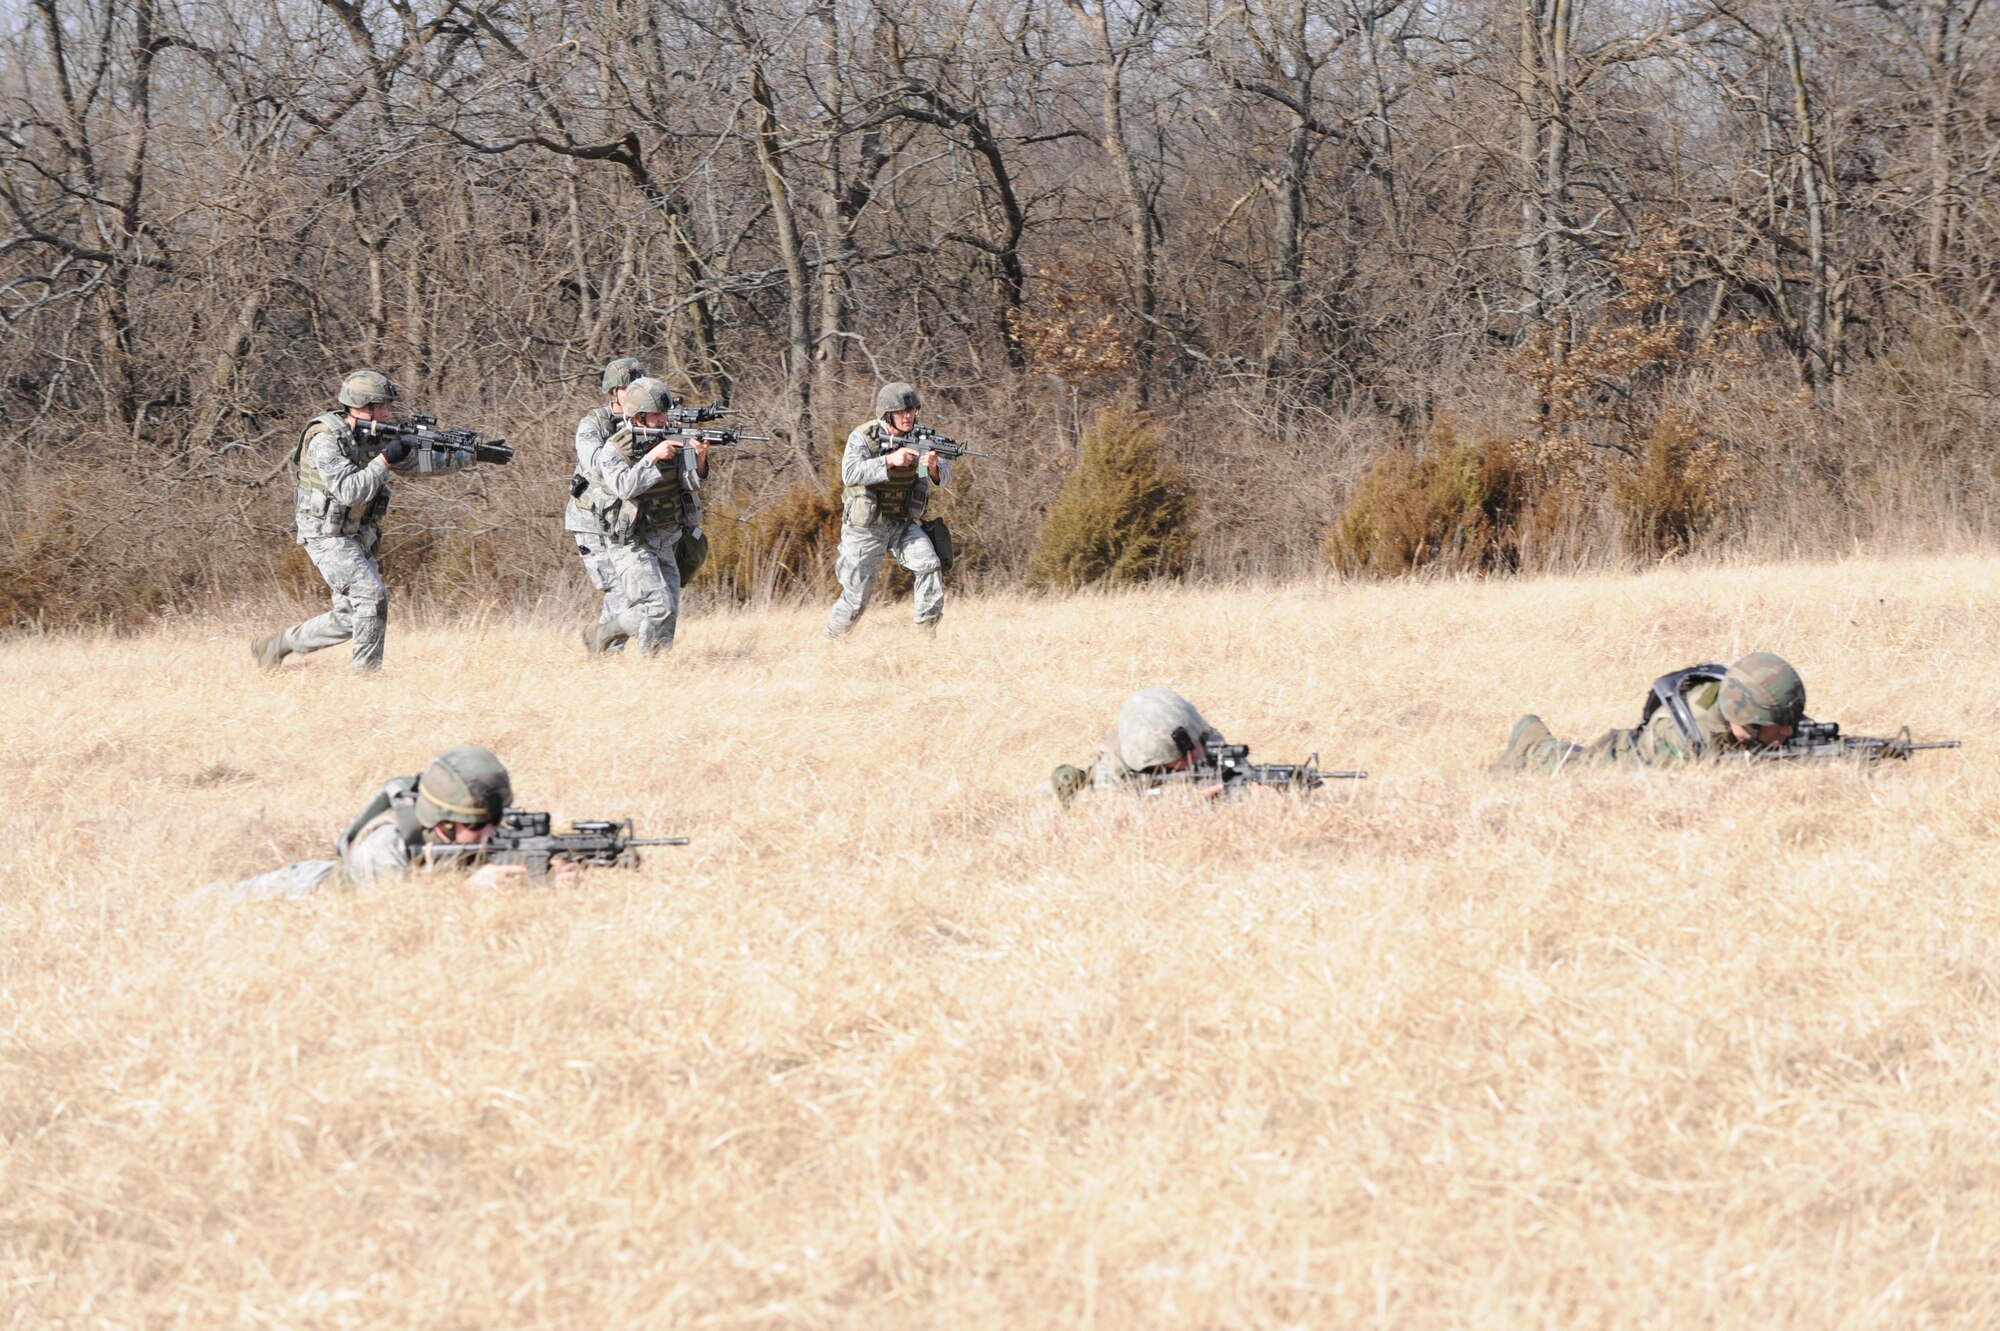 WHITEMAN AIR FORCE BASE, Mo. – Airmen from the 509th Security Forces Squadron charge forward with weapons ready at the Cobra training site during the Blue Coach training course  Feb. 6. (U.S. Air Force photo/Staff Sgt Charles Larkin)